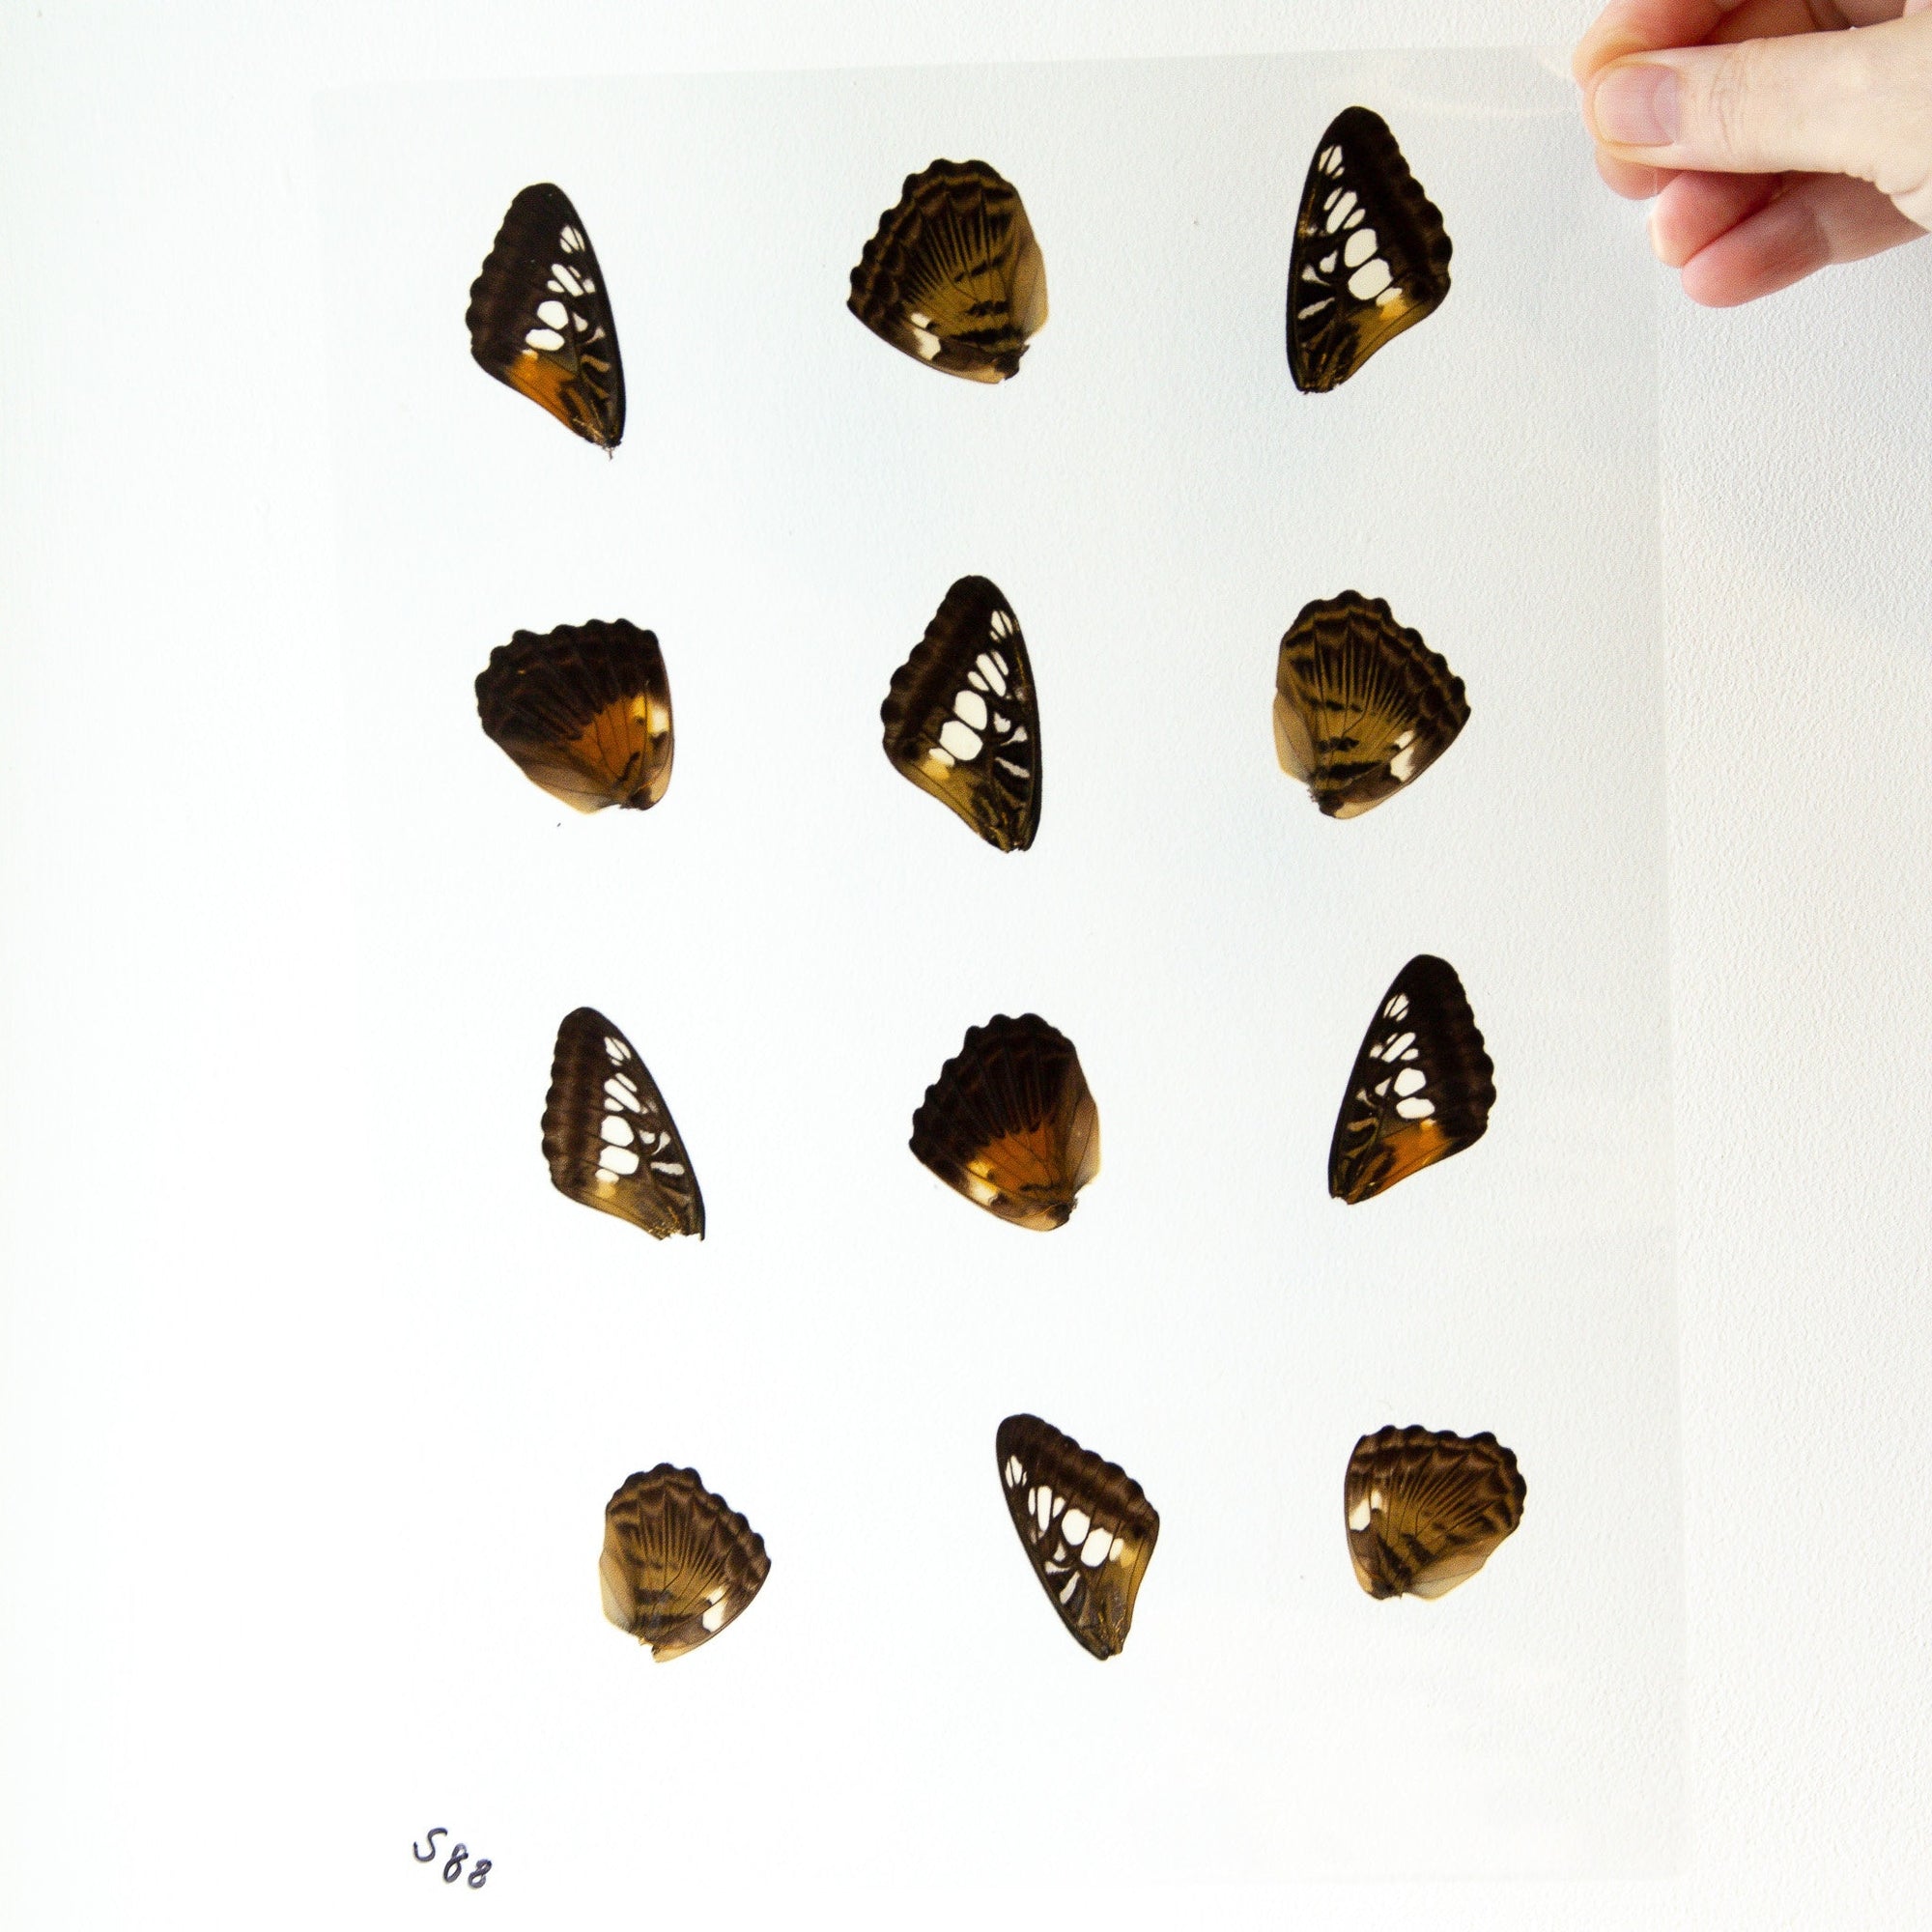 Butterfly Wings GLOSSY LAMINATED SHEET Real Ethically Sourced Specimens Moths Butterflies Wings for Art -- S88